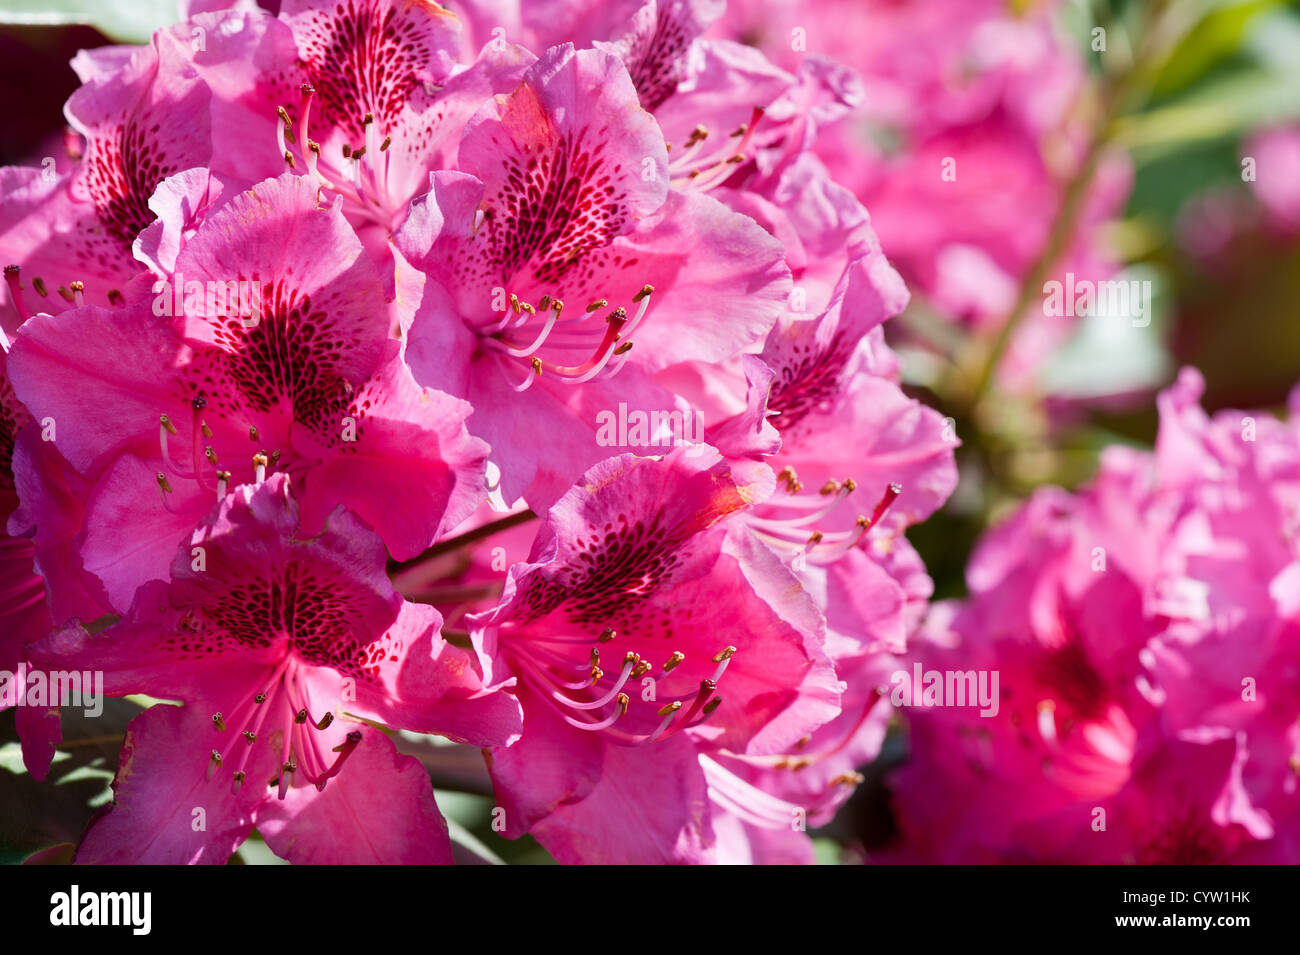 Rhododendron called Azalea bright pink flowers Stock Photo